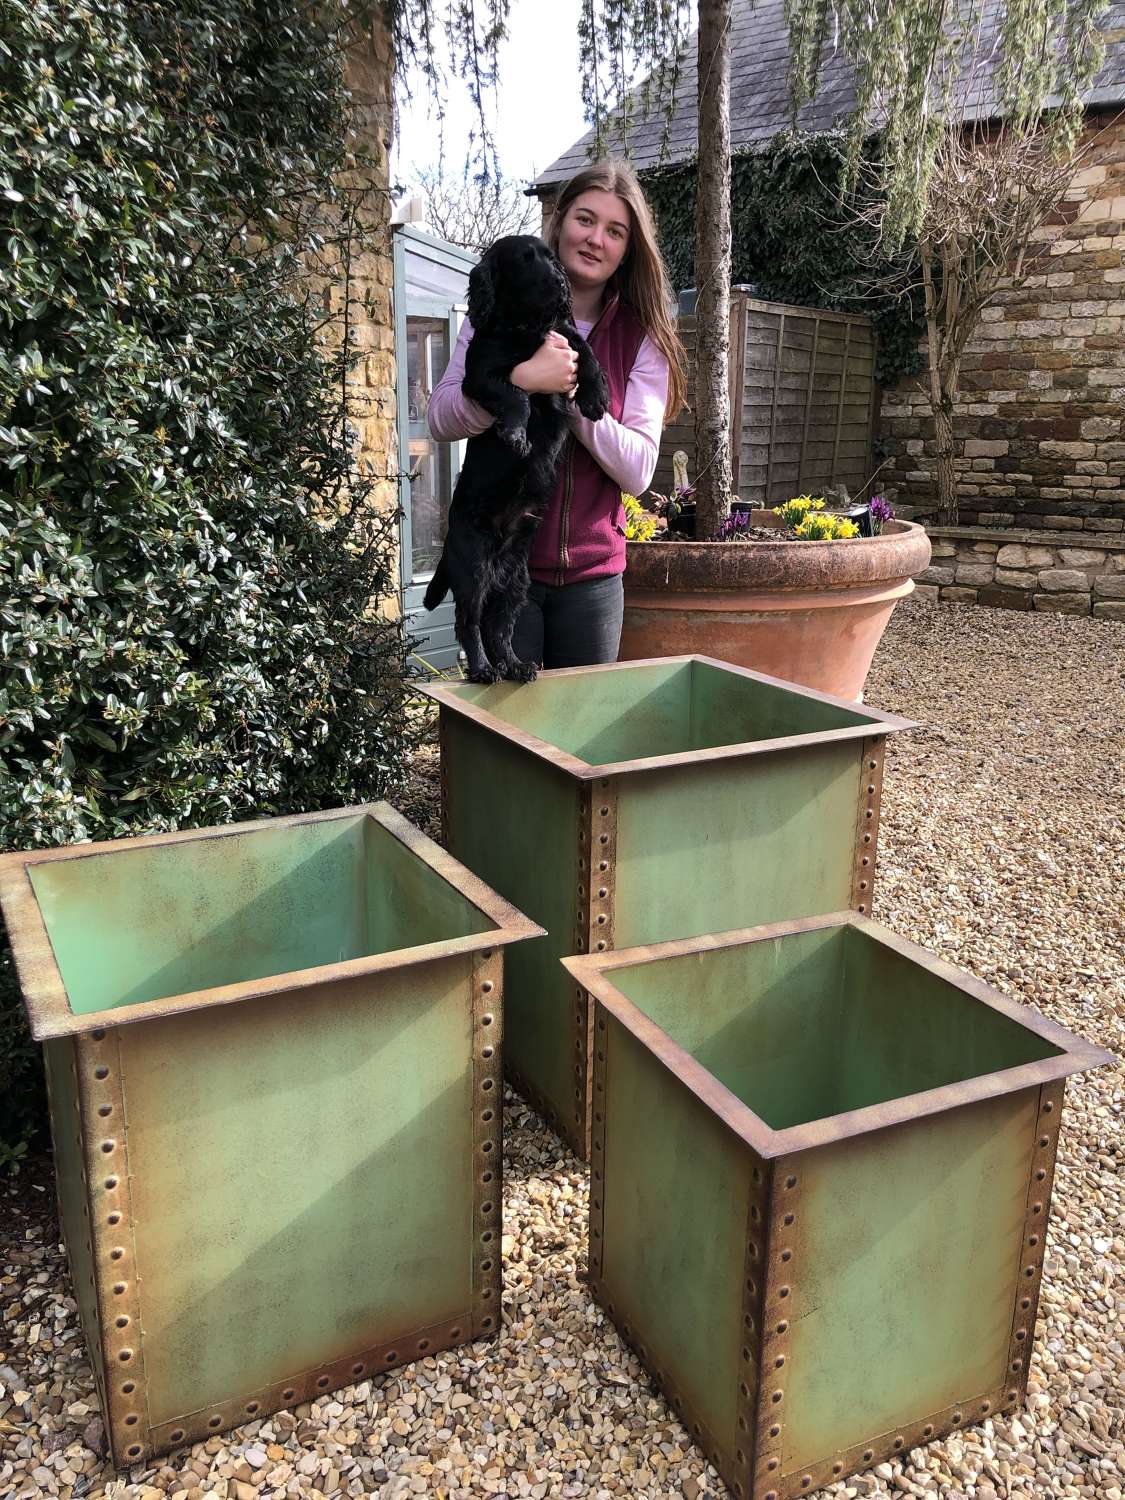 Set of Three Square Iron Riveted Planters - Iron Tubs x 3 Copper Green